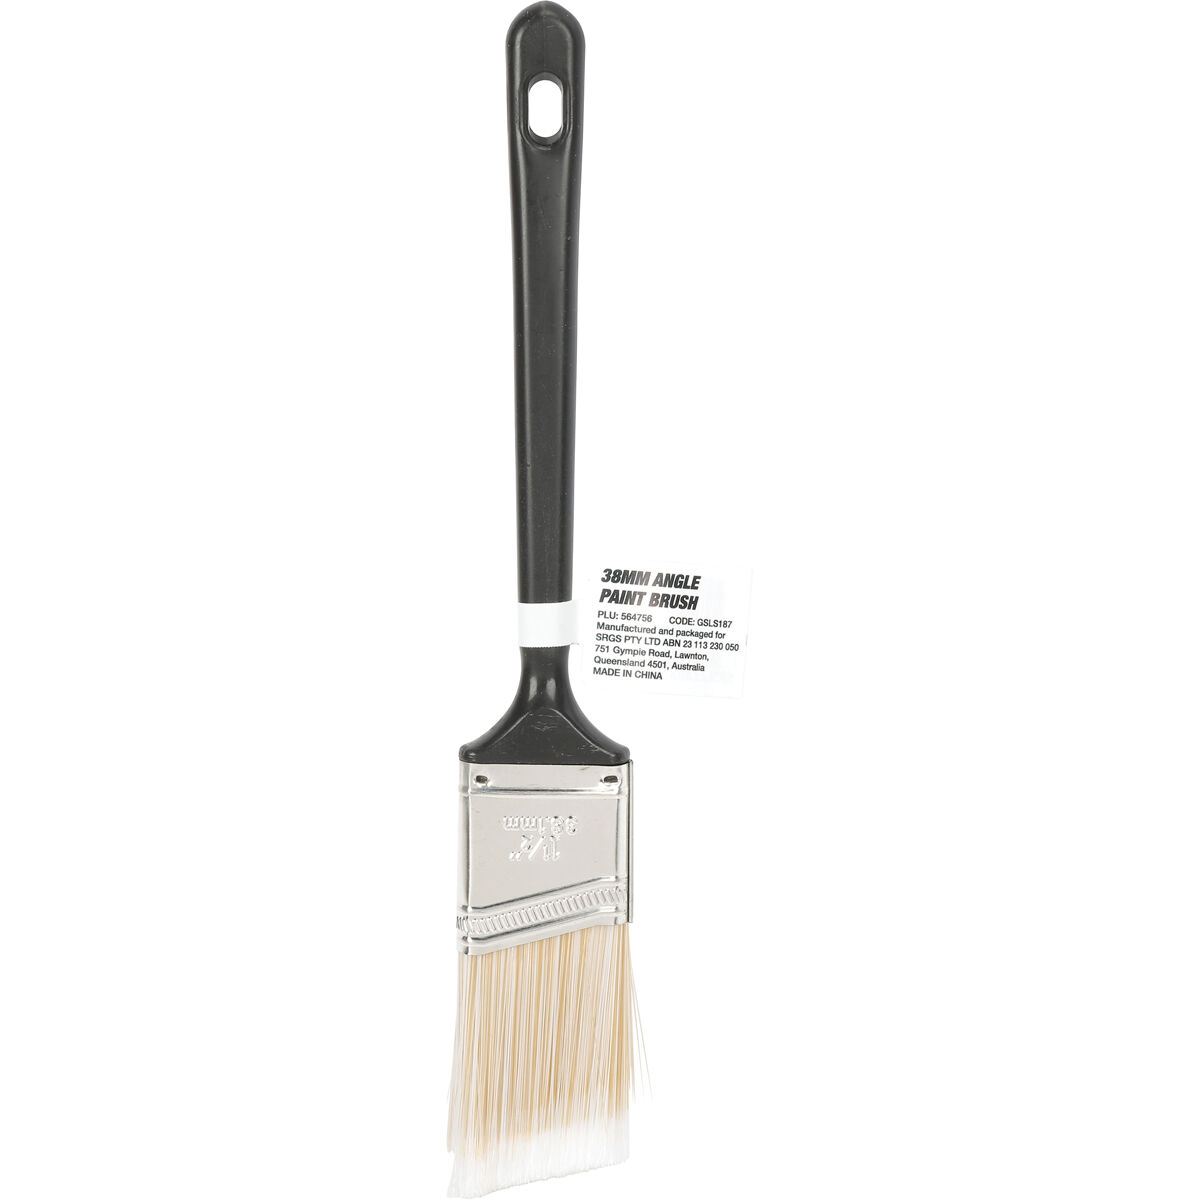 SCA Angled Paint Brush - 38mm, , scaau_hi-res